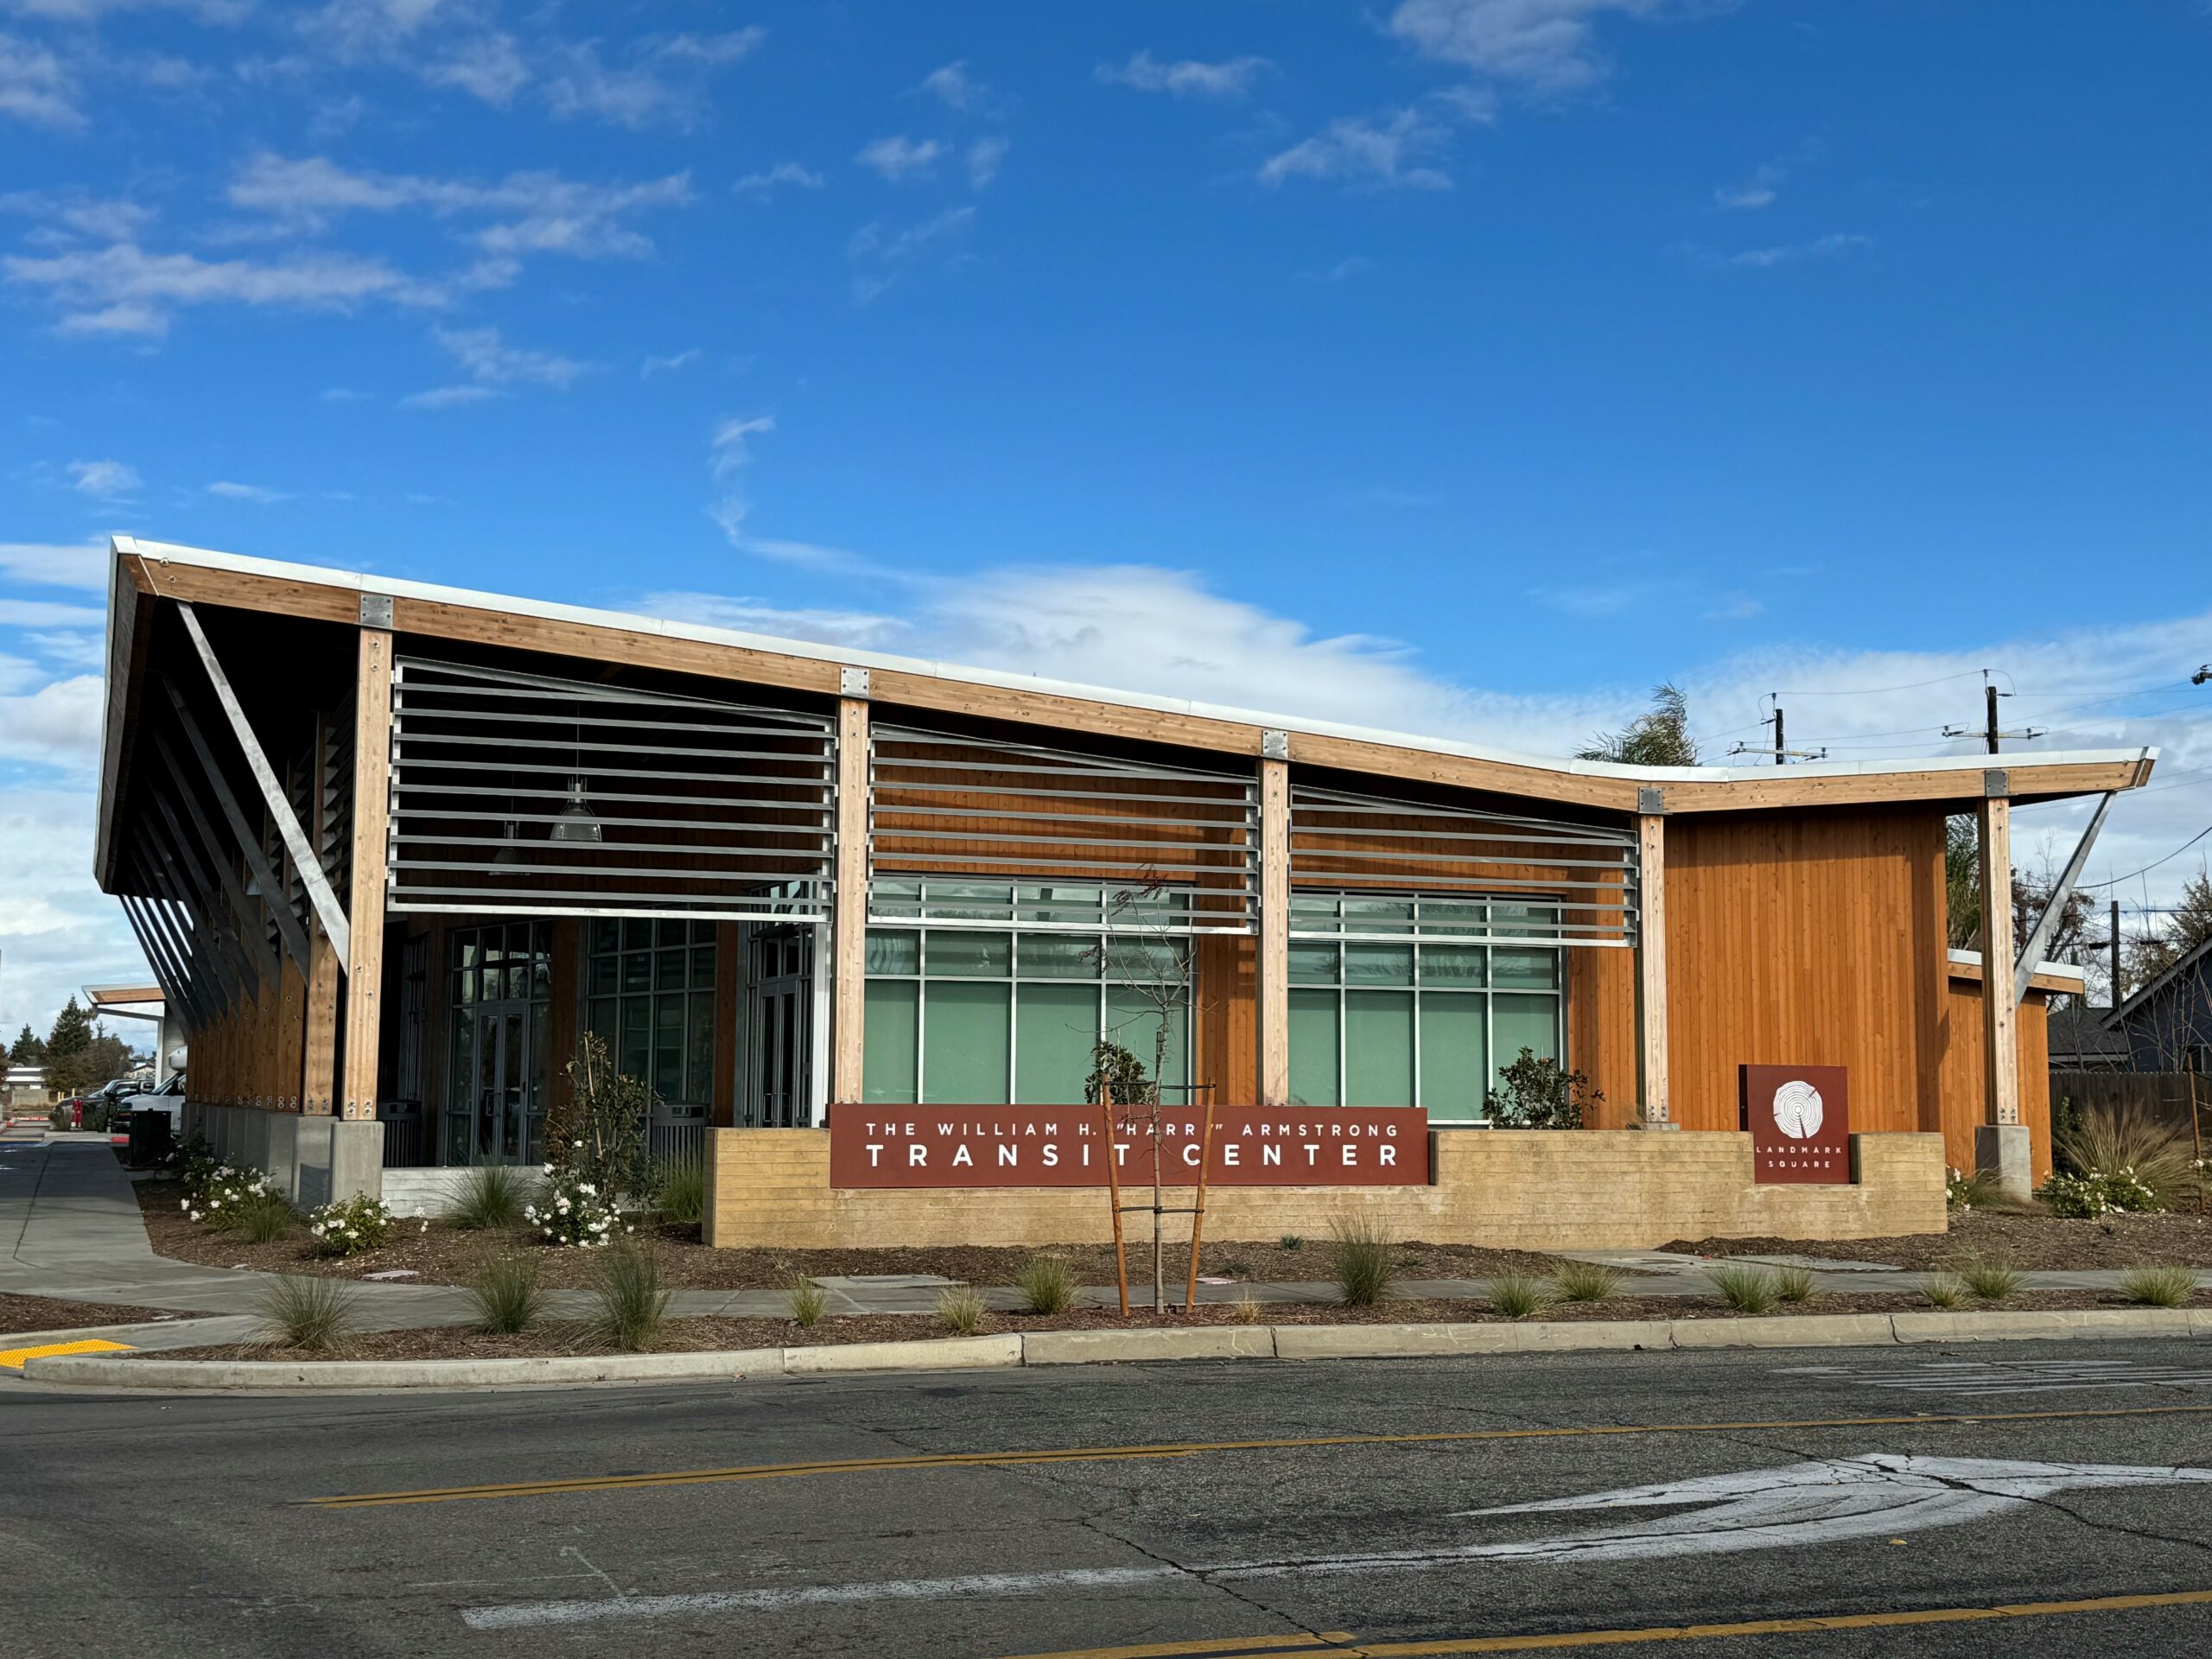 You are currently viewing City of Clovis Announces Ribbon-Cutting Celebration for New Transit Center, Invites Community to Attend and Tour the New Facility